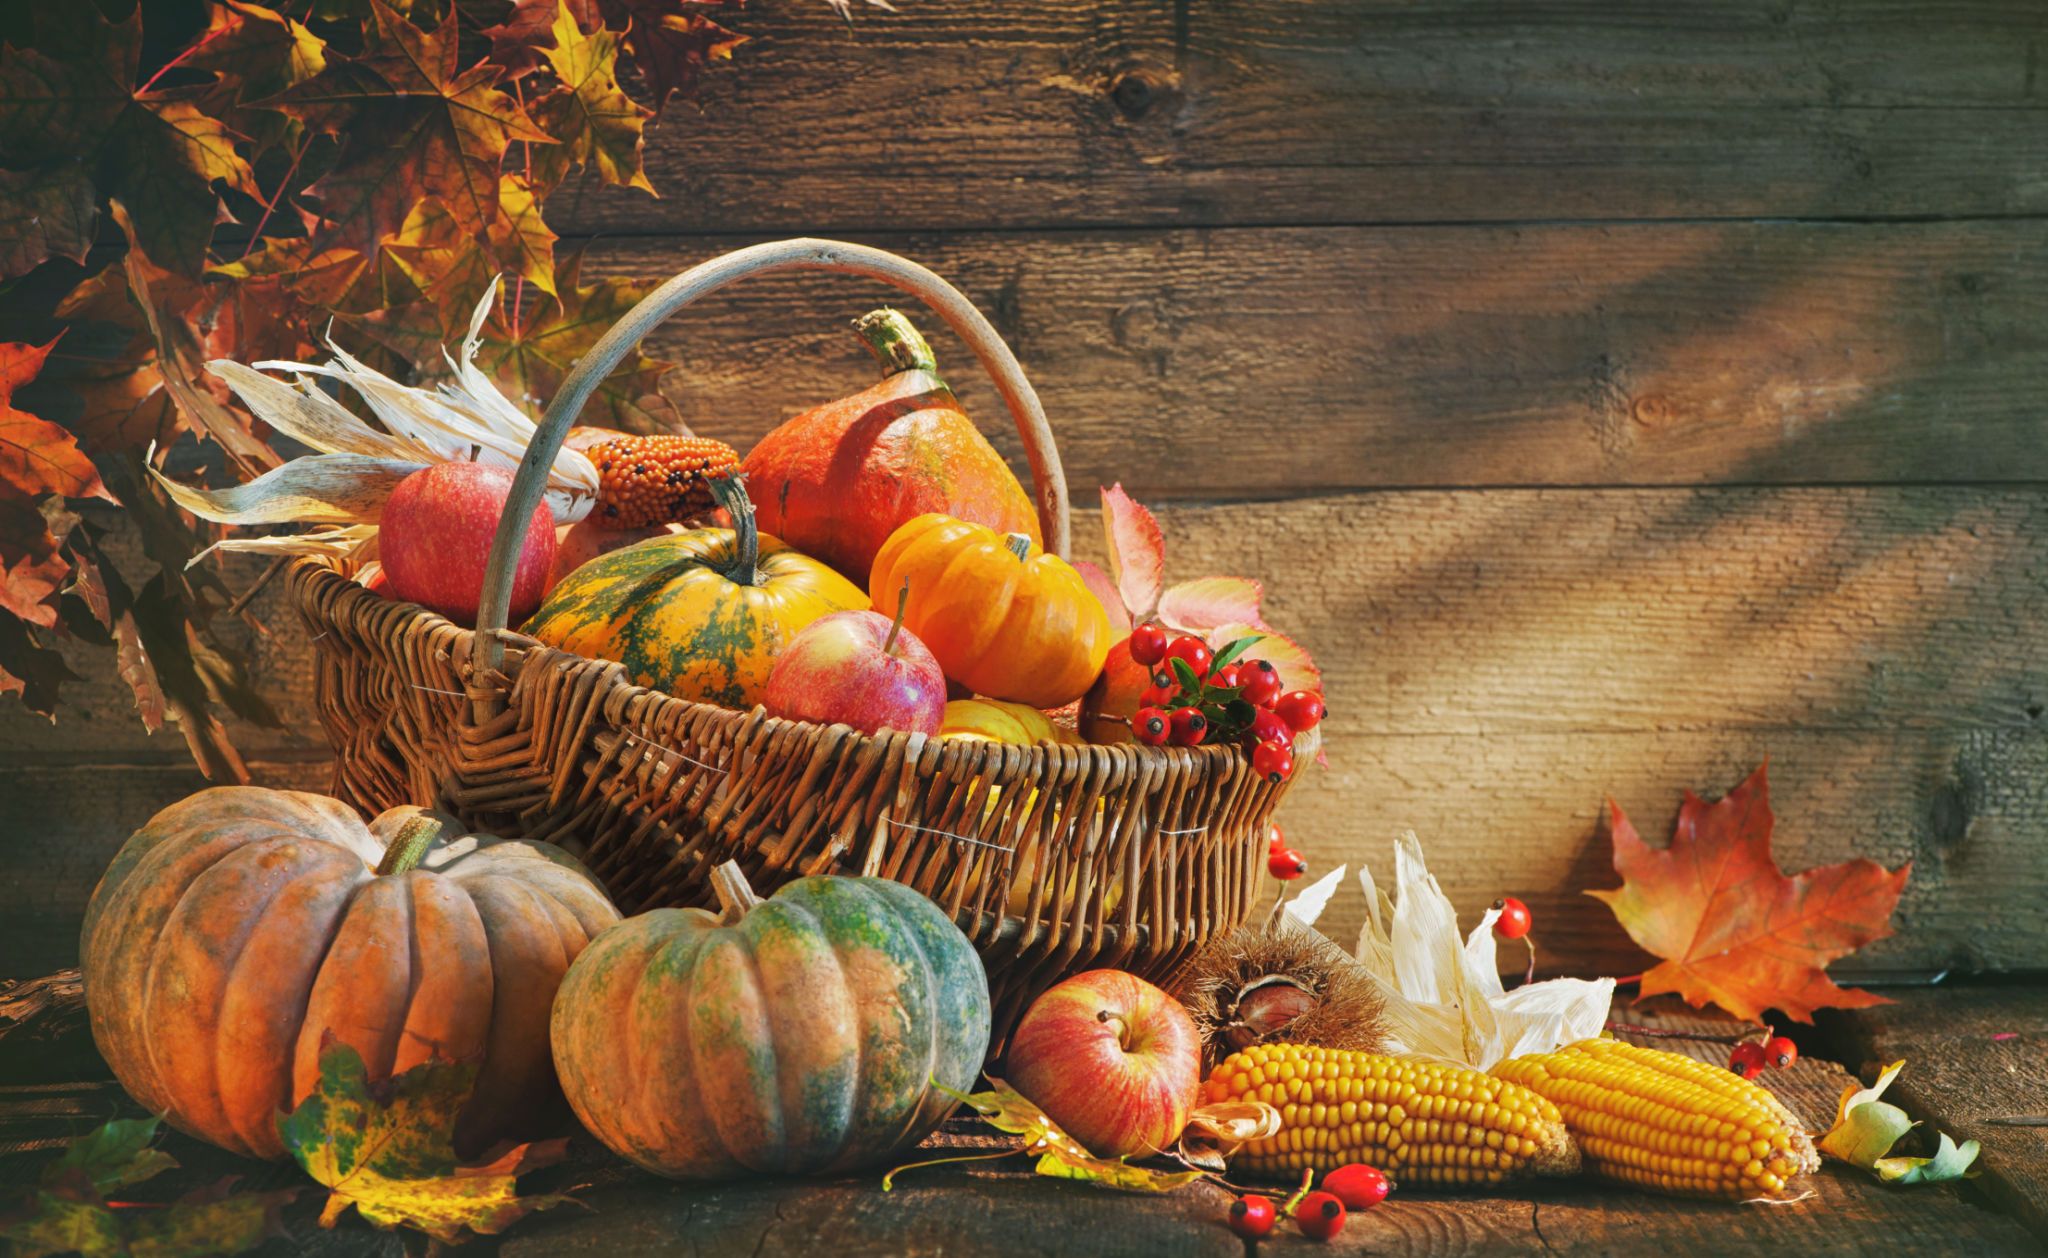 Happy Thanksgiving Image & Picture HD [2020] 2020, Meaning, Quotes, Message, Food